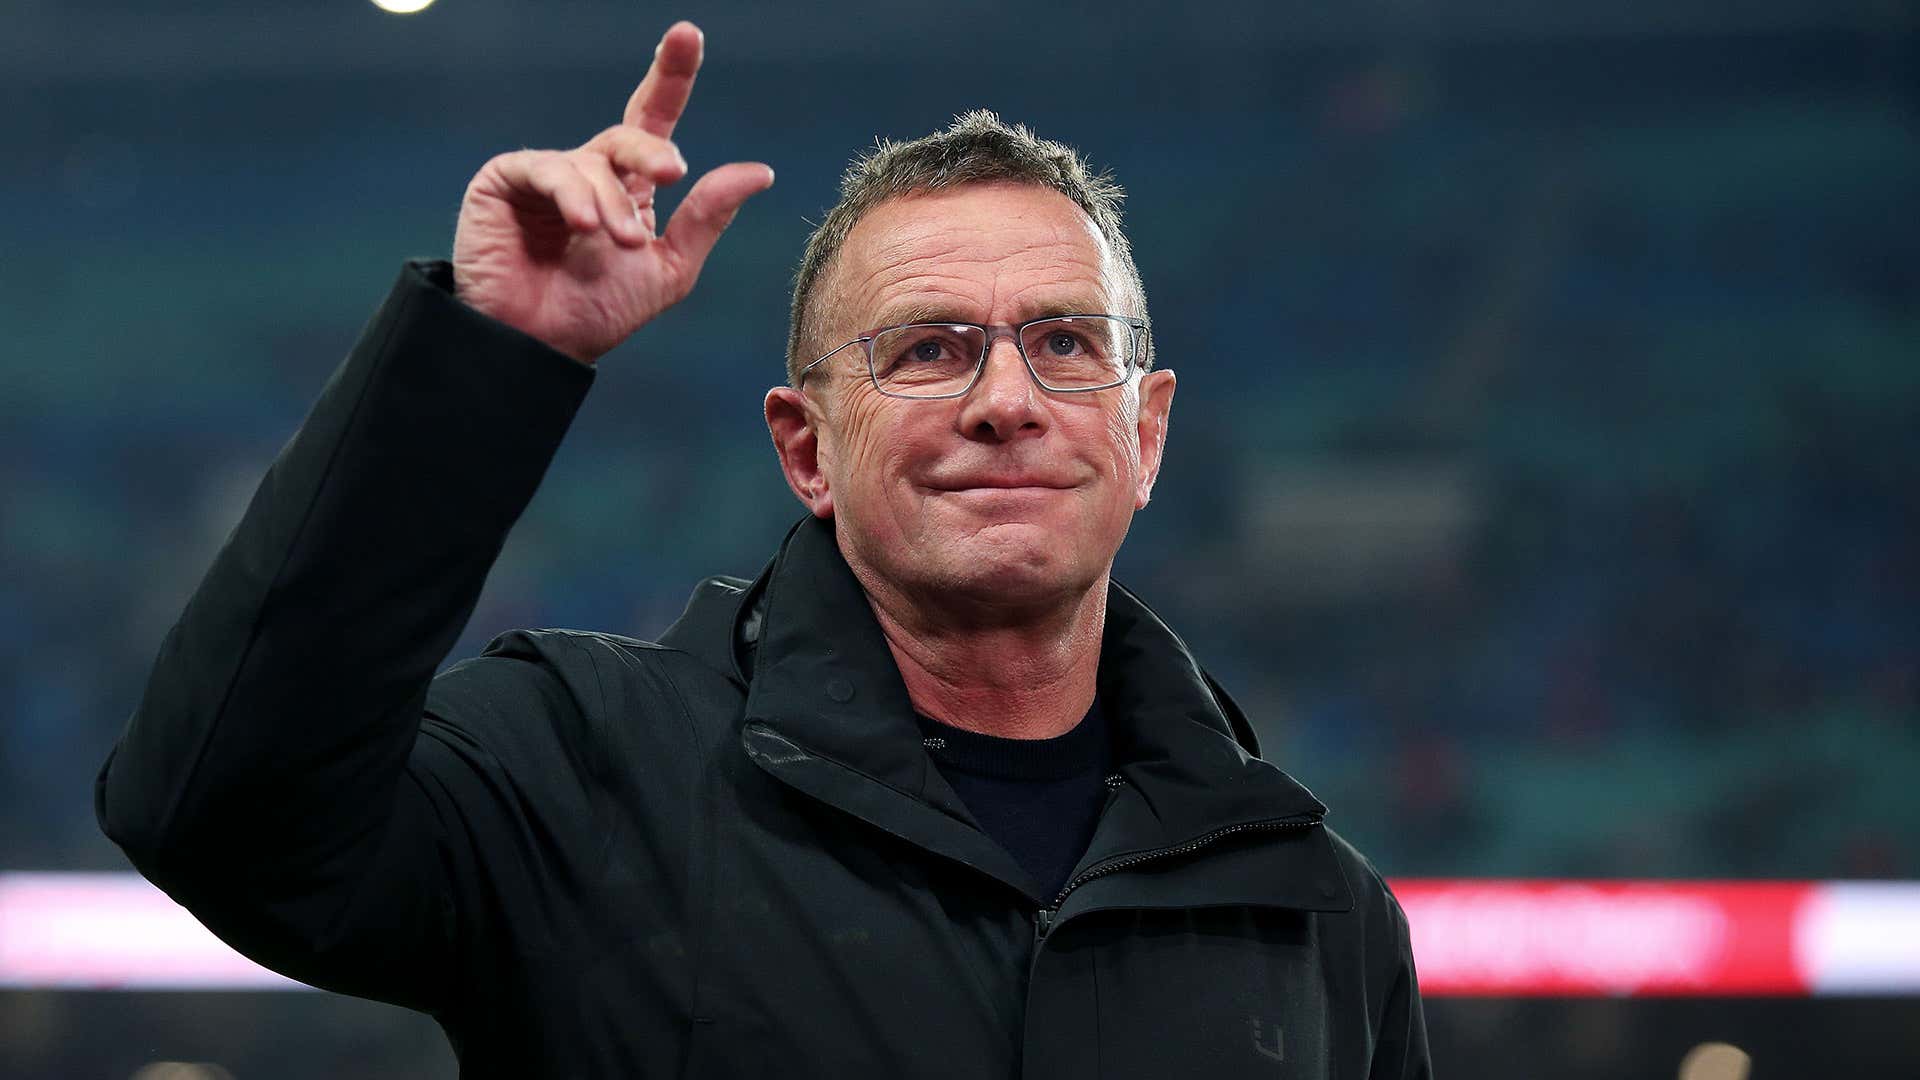 BREAKING: Man United Hire Rangnick As Interim Coach After Ole’s Exit